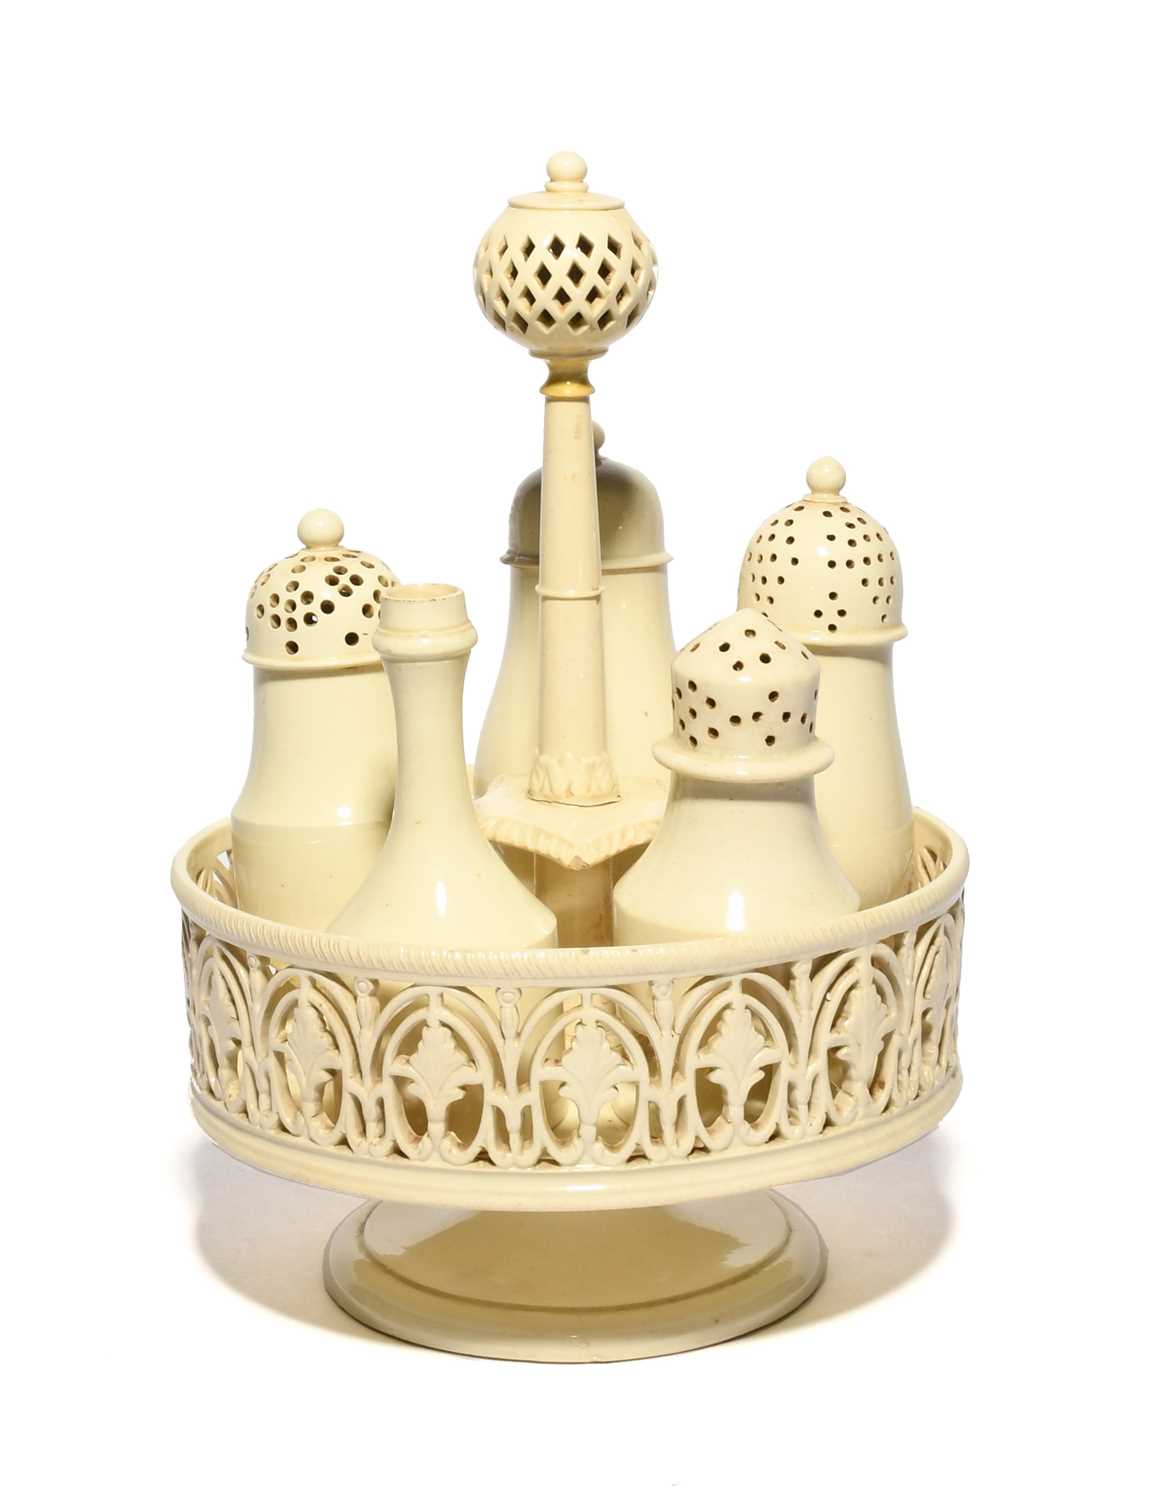 A Leeds creamware cruet or condiment stand, late 18th century, the circular galleried stand set with